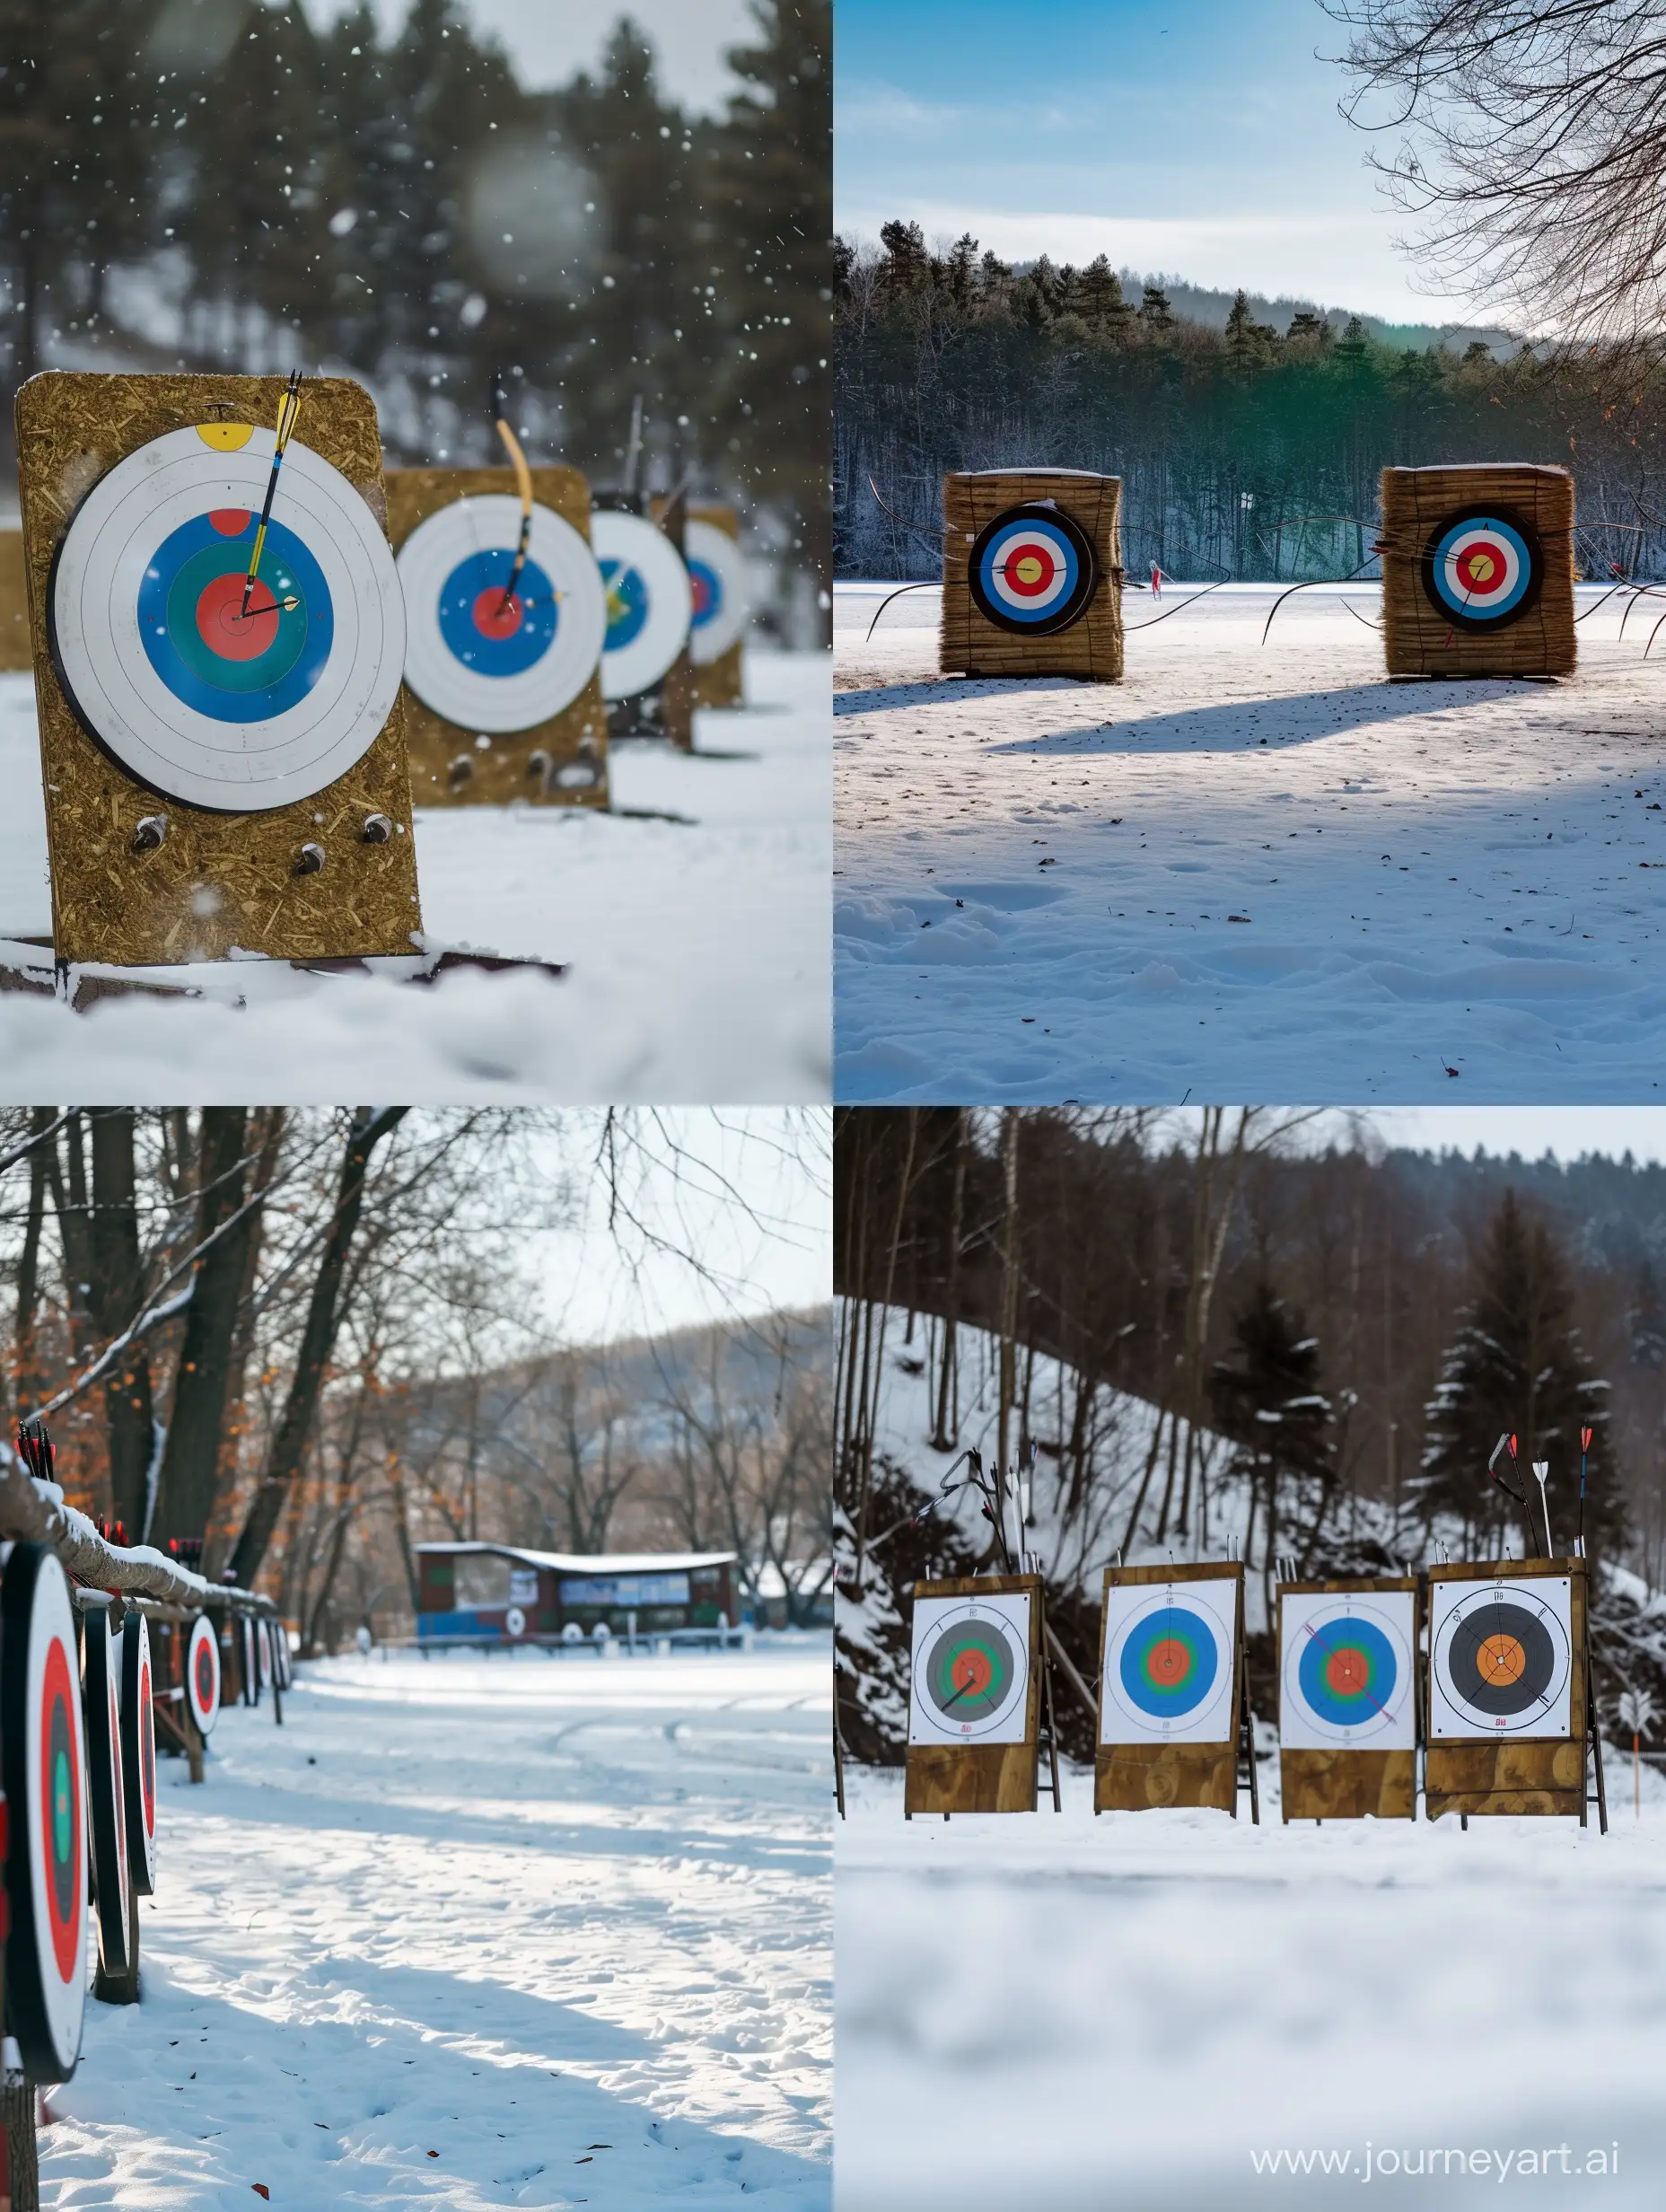 Shooting range for archers in winter